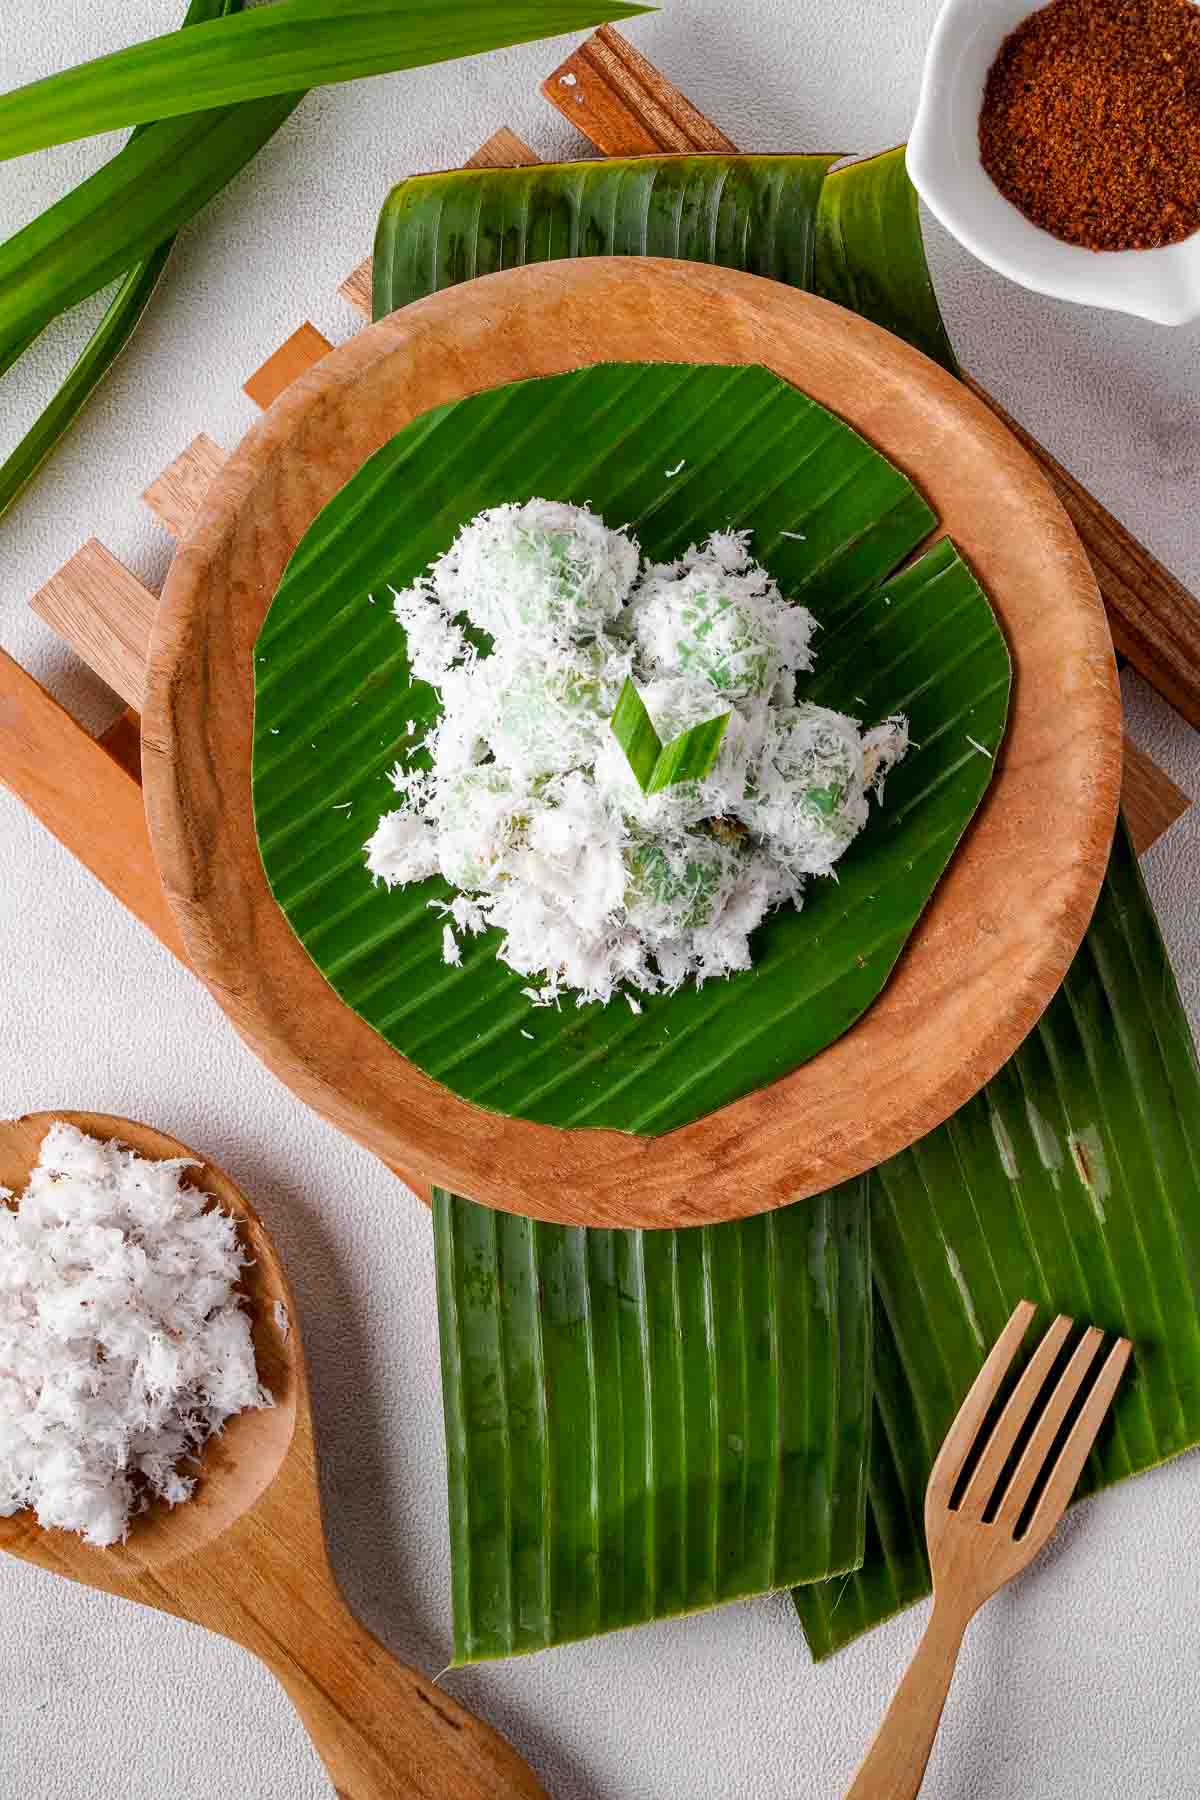 A top down view of several Indonesian klepon, covered in lots of grated coconut, served on a banana leaf. A wooden serving dish with more grated coconut can be seen at the bottom of the image.